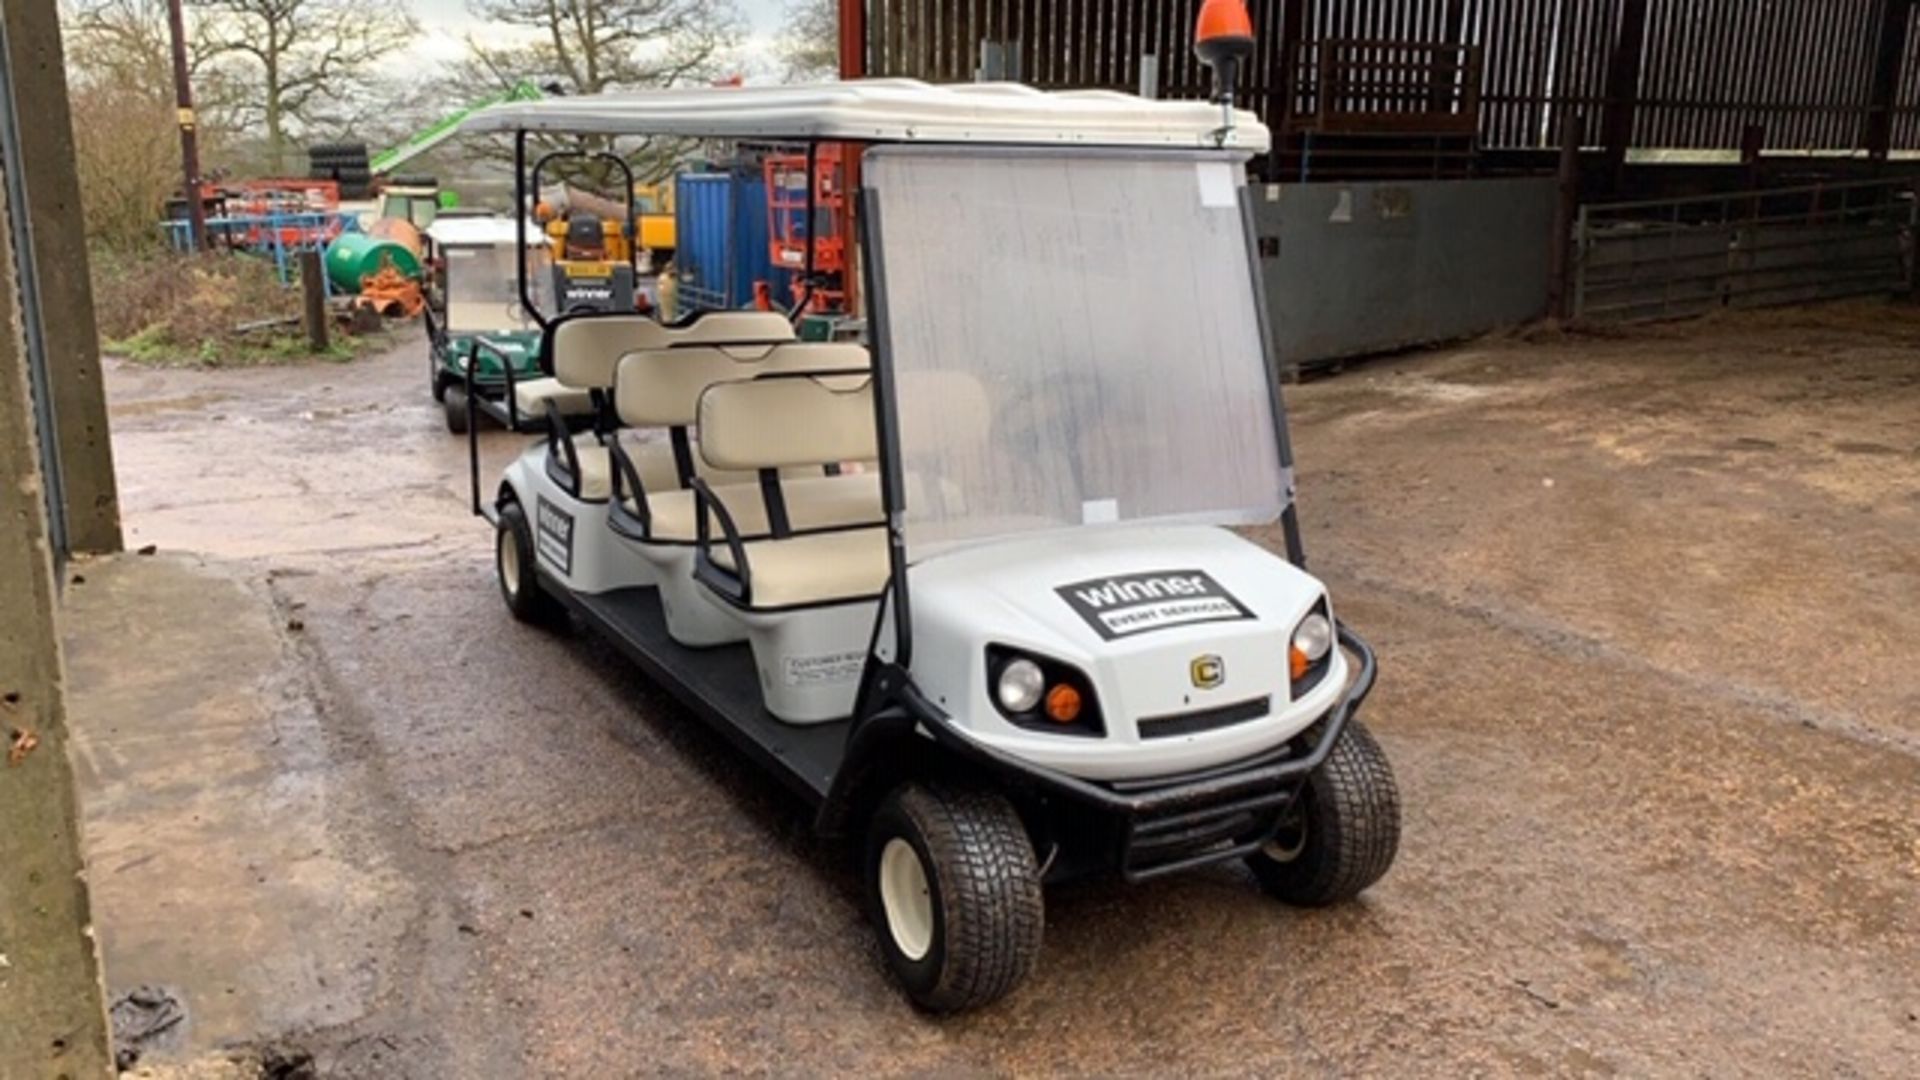 CUSHMAN EZGO SHUTTLE 8 PETROL ENGINED 8 SEATER GOLF / EVENTS BUGGY. YEAR 2017 BUILD. DIRECT FROM - Image 2 of 6